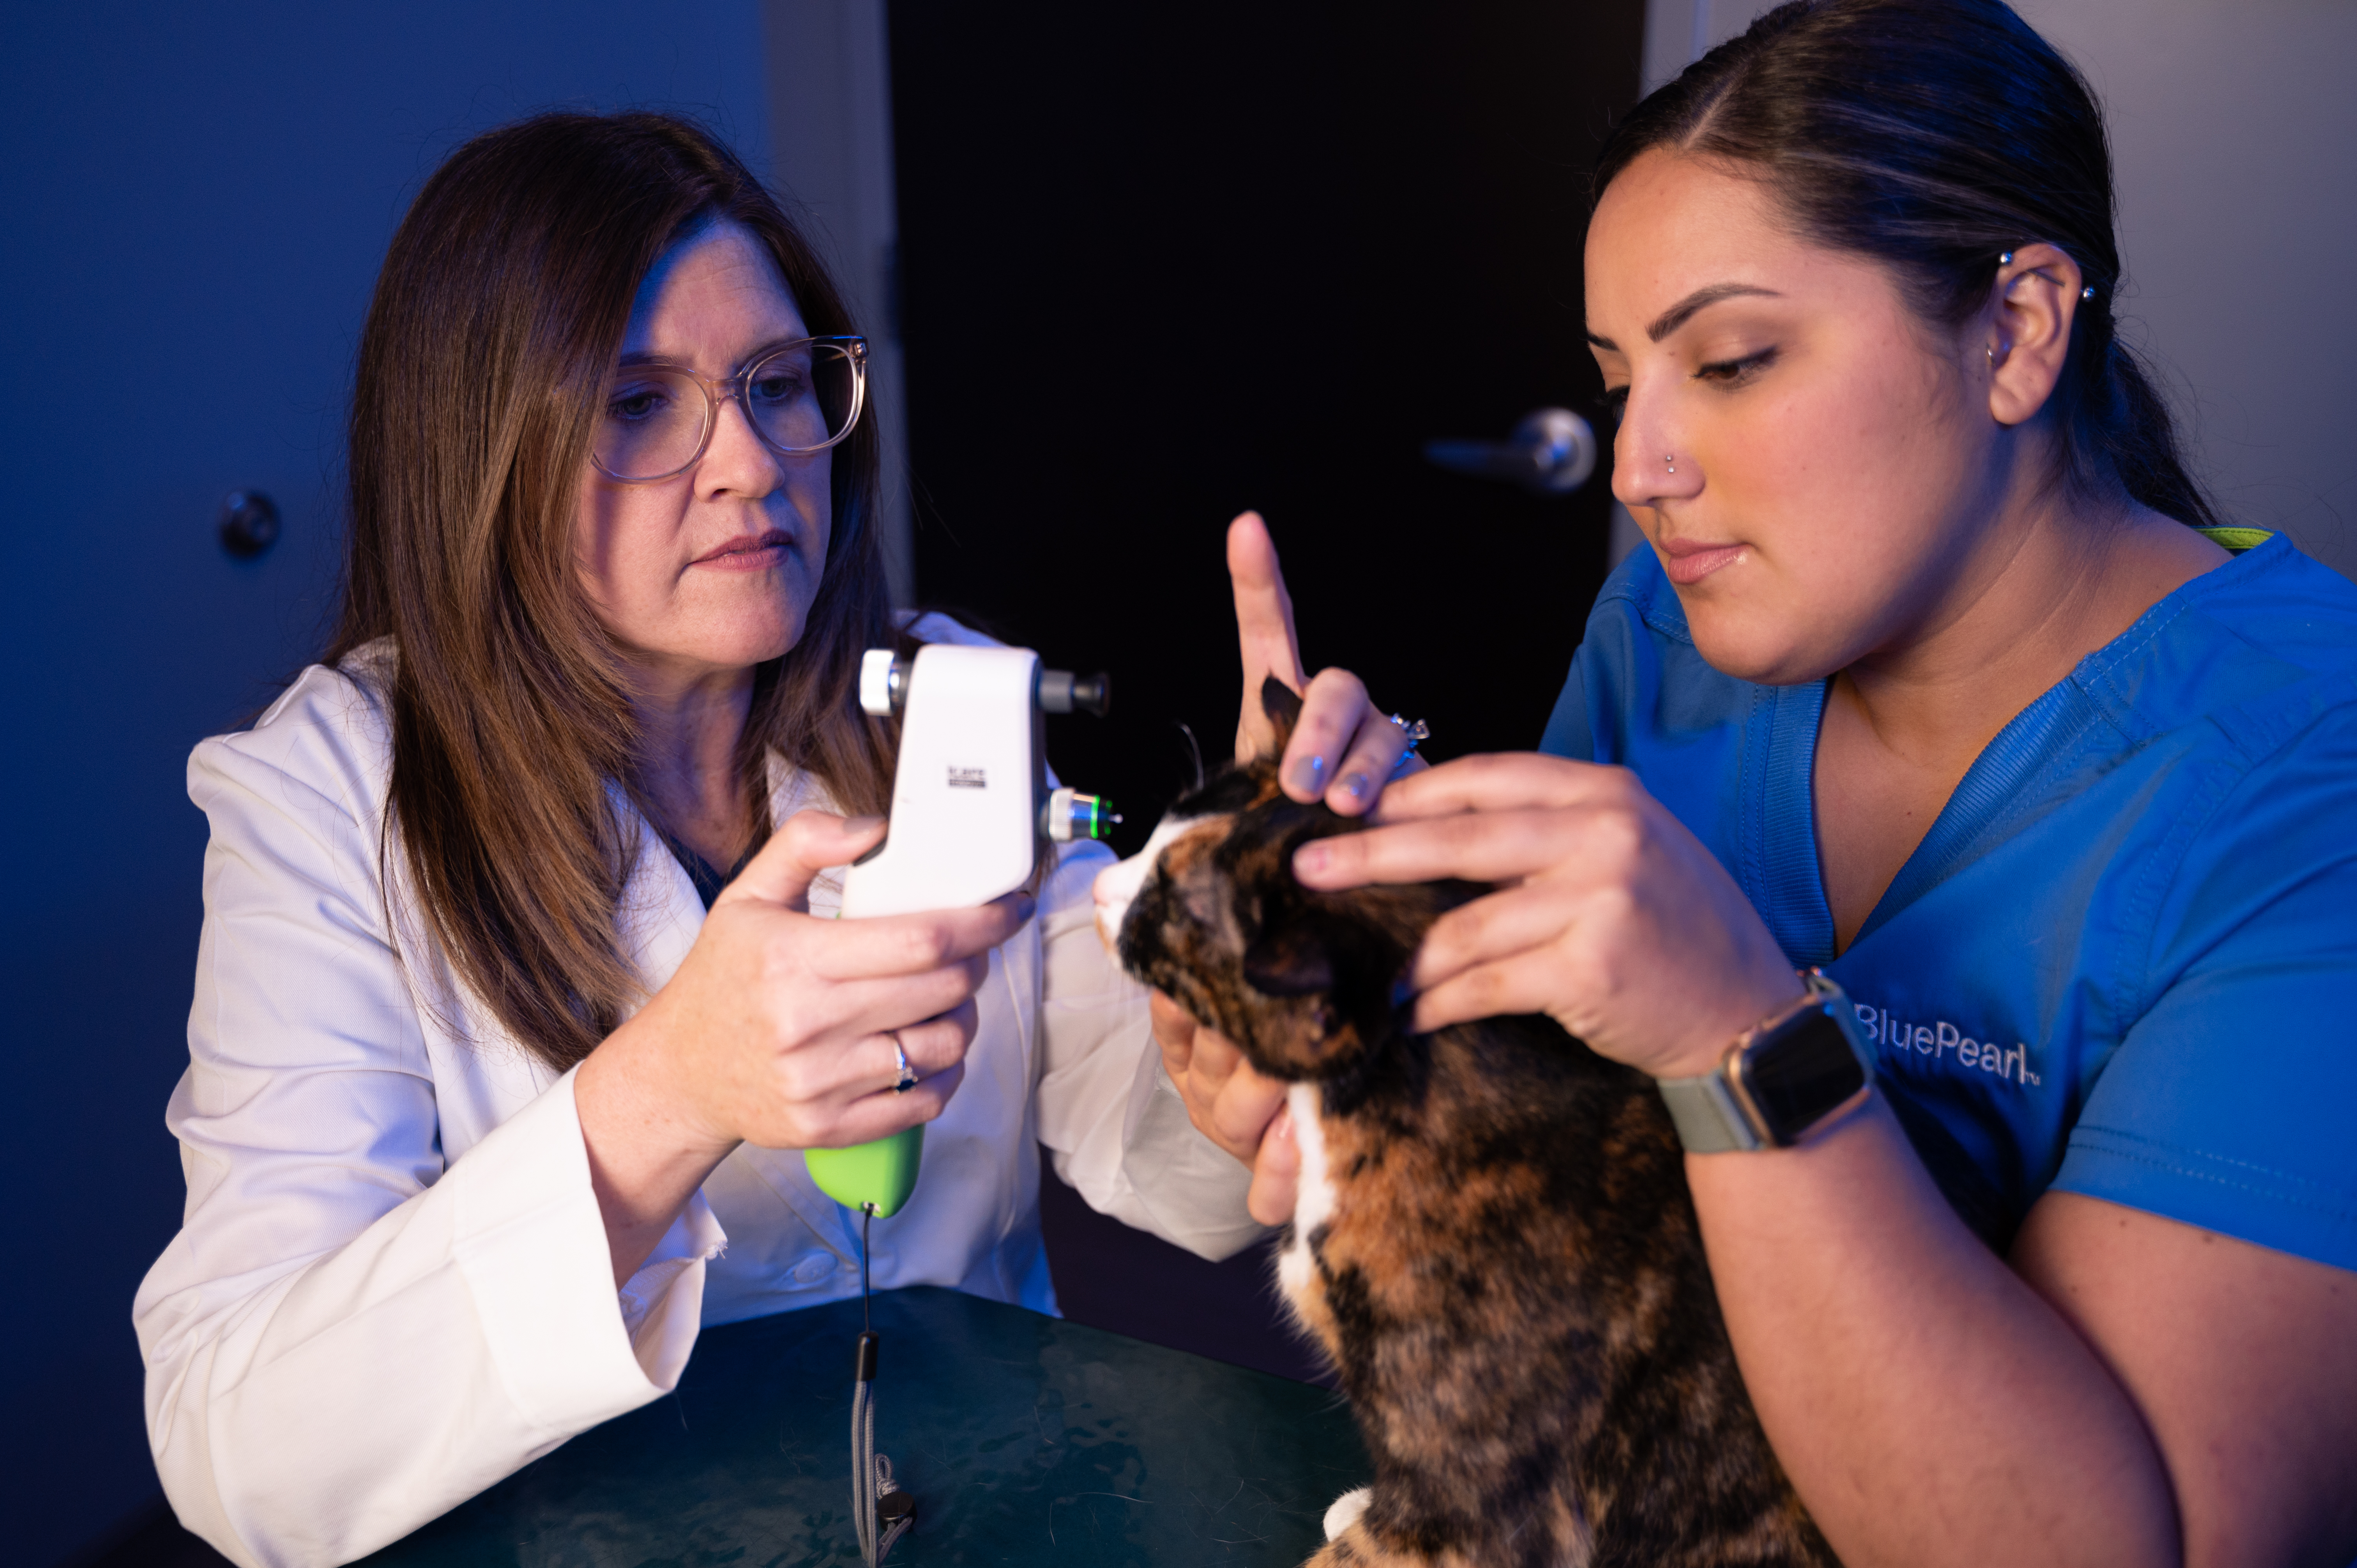 An ophthalmology veterinarian examines a patient with the help of a technician.